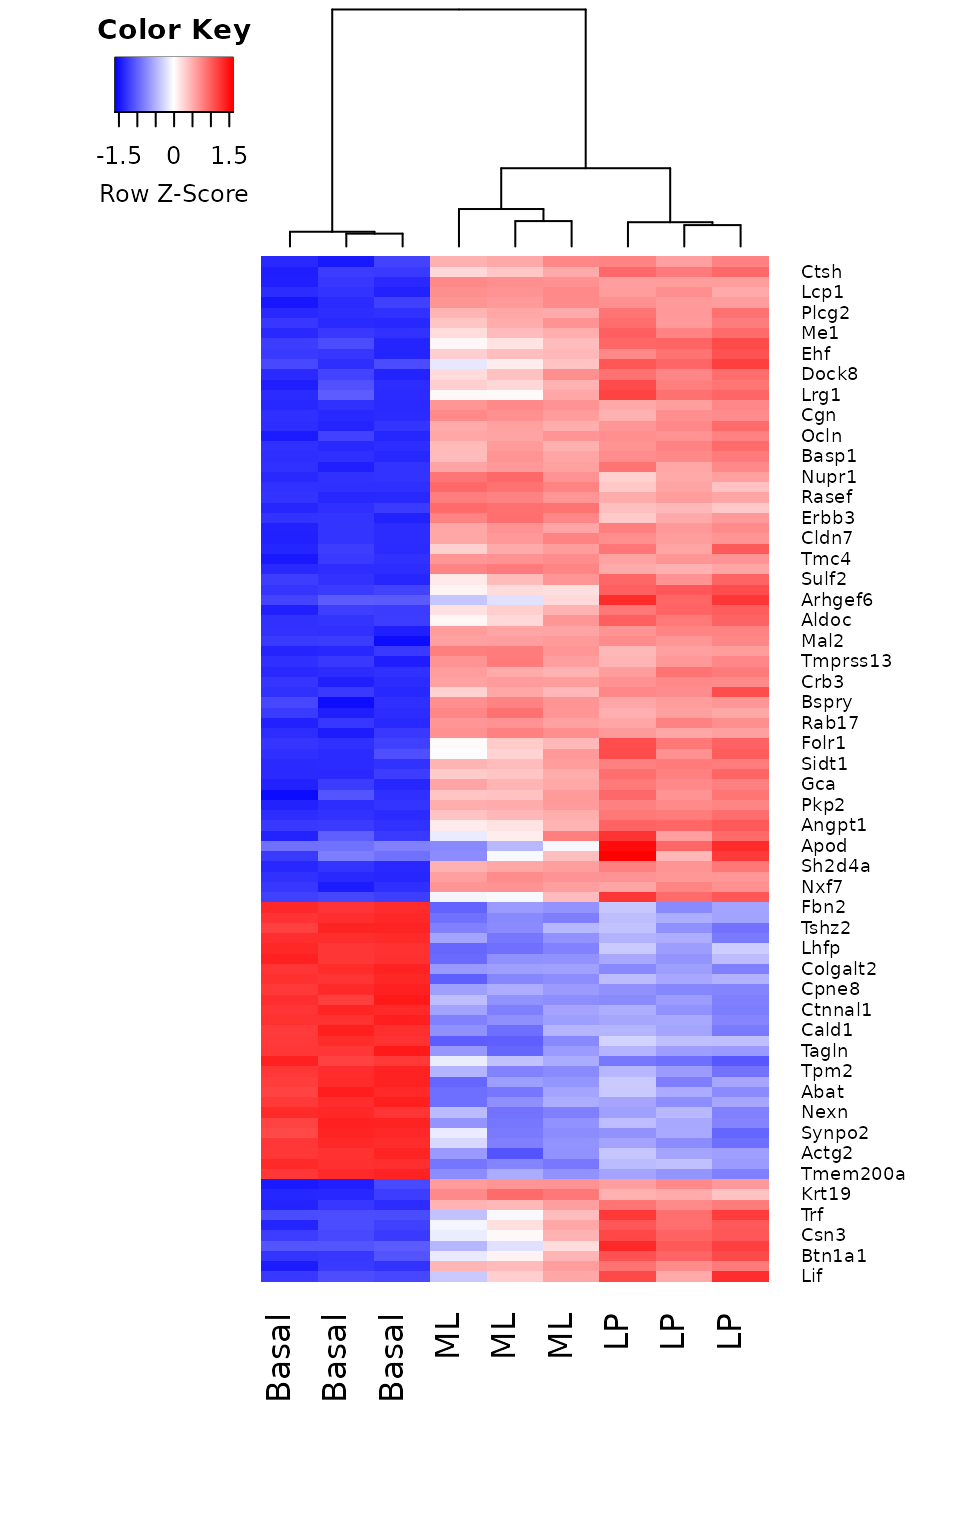 Heatmap of log-CPM values for top 100 genes DE in basal versus LP. Expression across each gene (or row) have been scaled so that mean expression is zero and standard deviation is one. Samples with relatively high expression of a given gene are marked in red and samples with relatively low expression are marked in blue. Lighter shades and white represent genes with intermediate expression levels. Samples and genes have been reordered by the method of hierarchical clustering. A dendrogram is shown for the sample clustering.